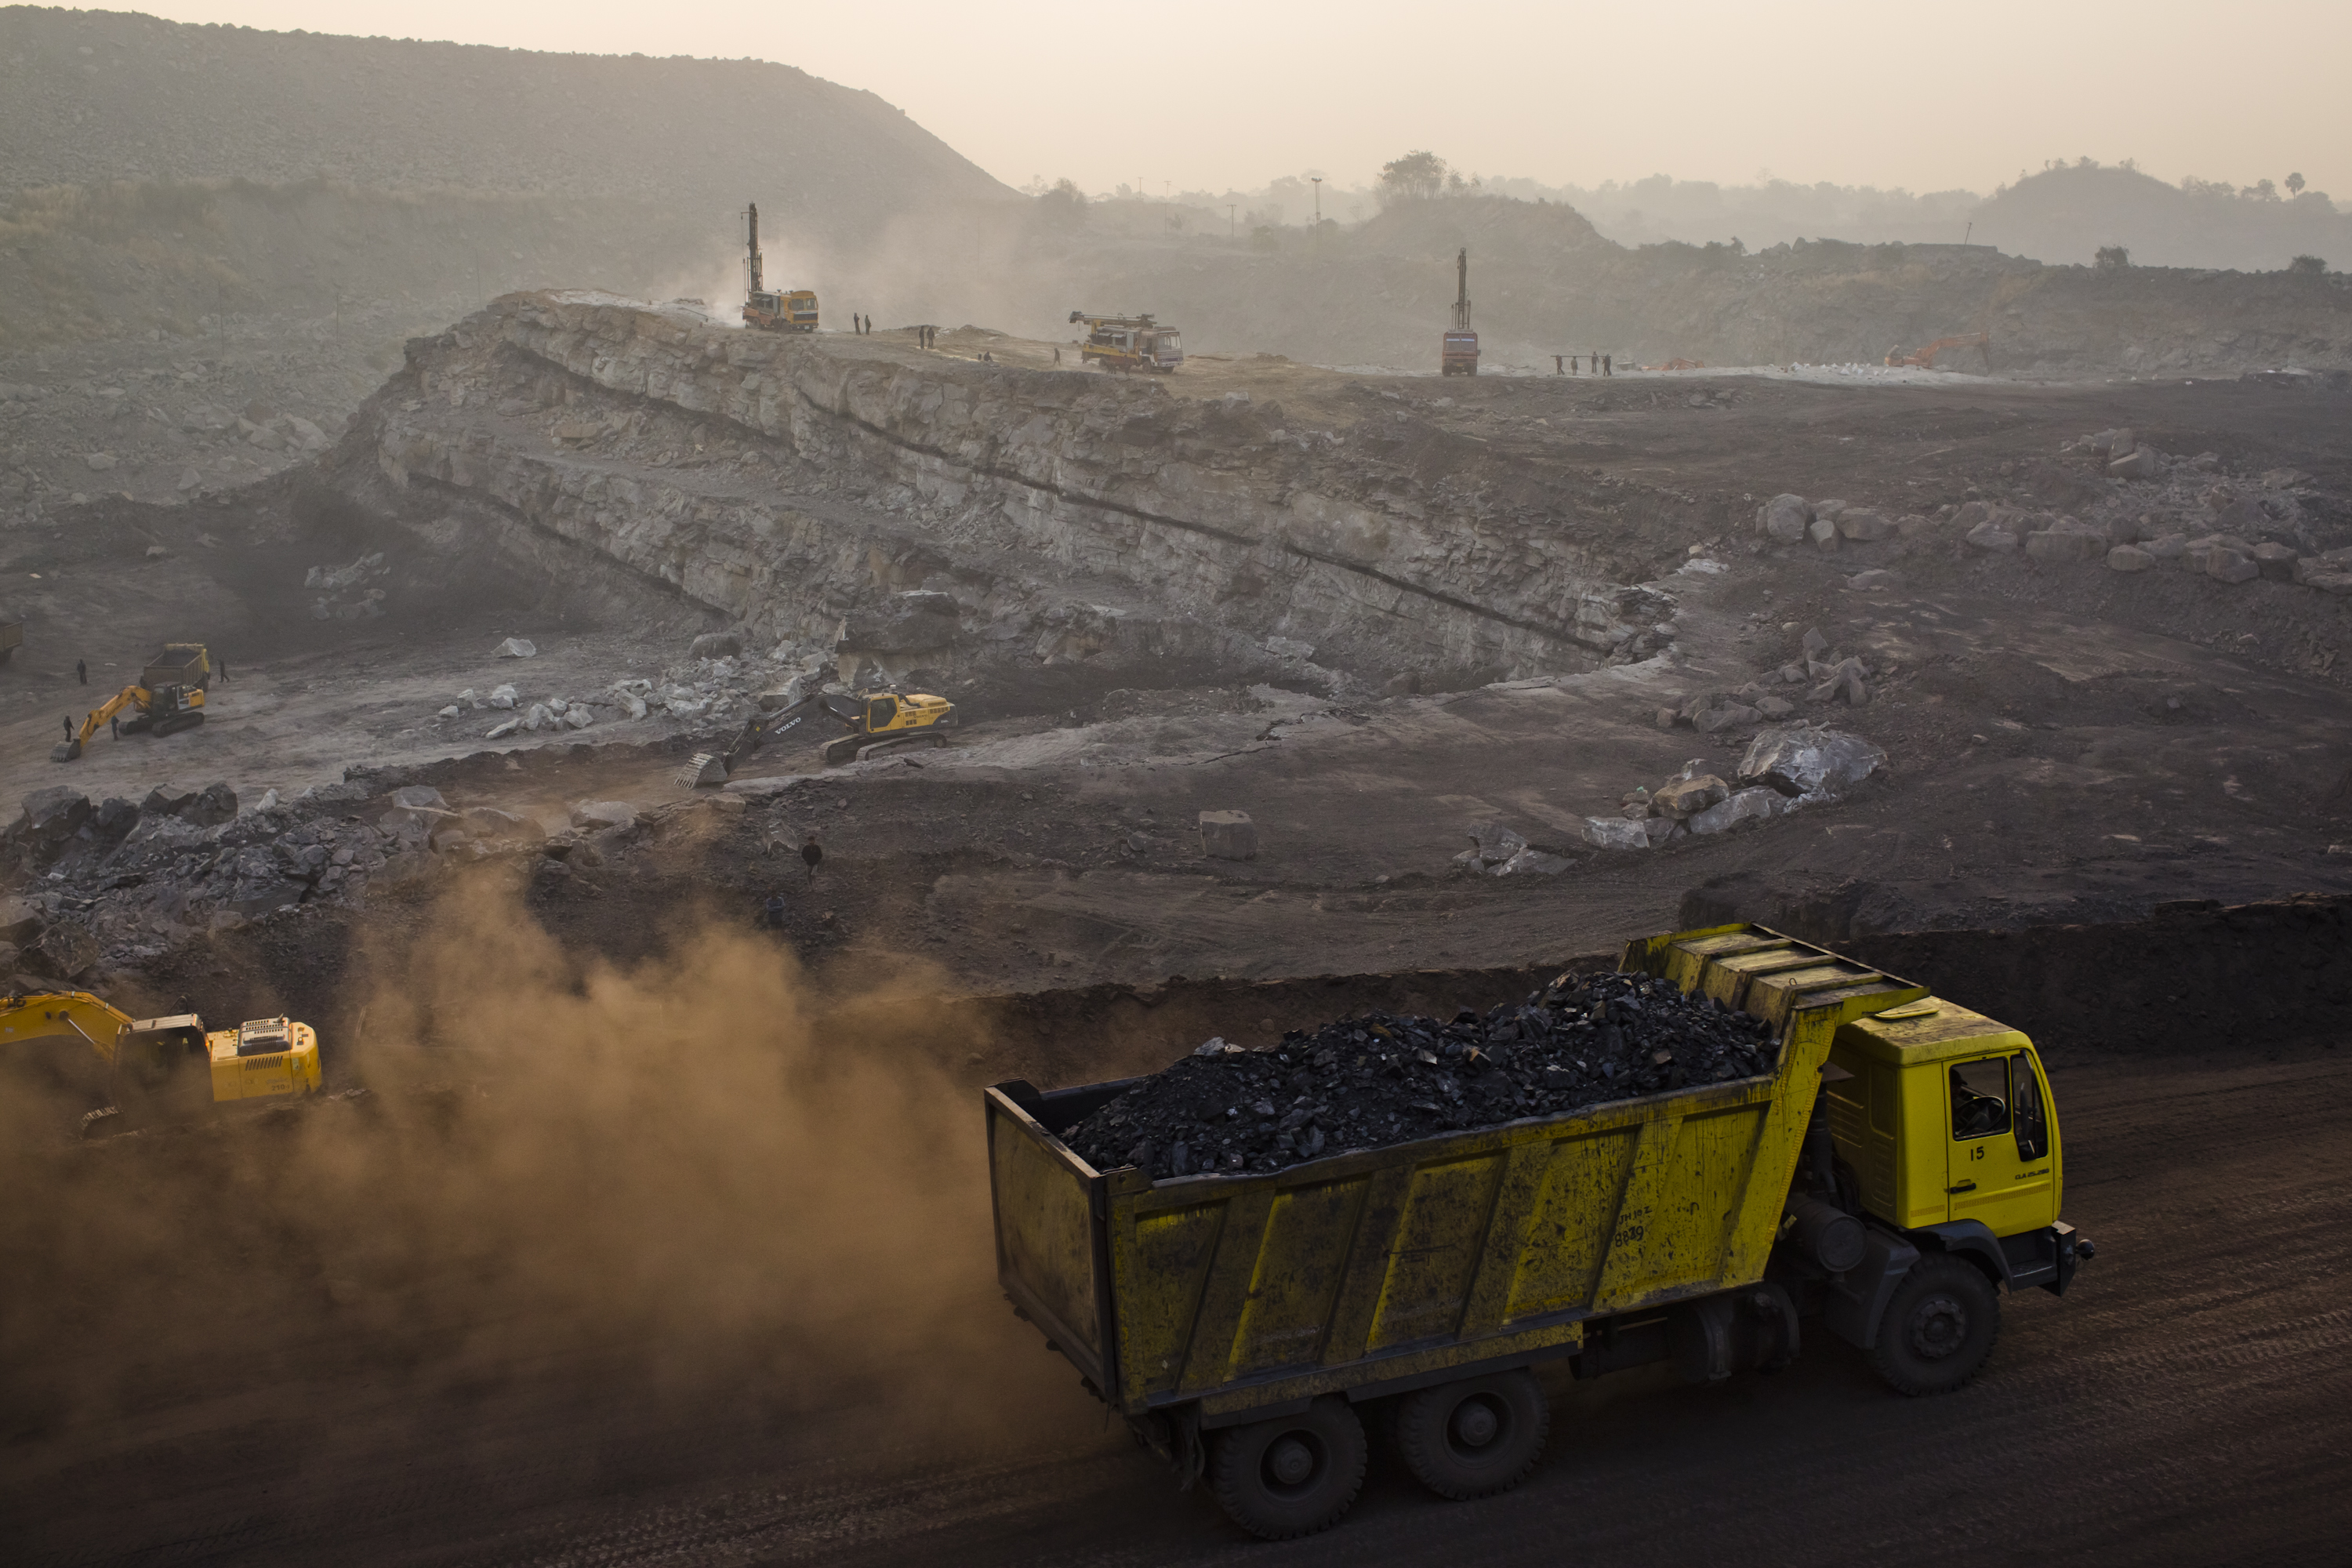 A fully laden truck carrying coal drives out of an open-cast coal mine as excavation work continues in the Indian village of Jina Gora, near Jharia, on Feb. 9, 2012 (Daniel Berehulak—Getty Images)